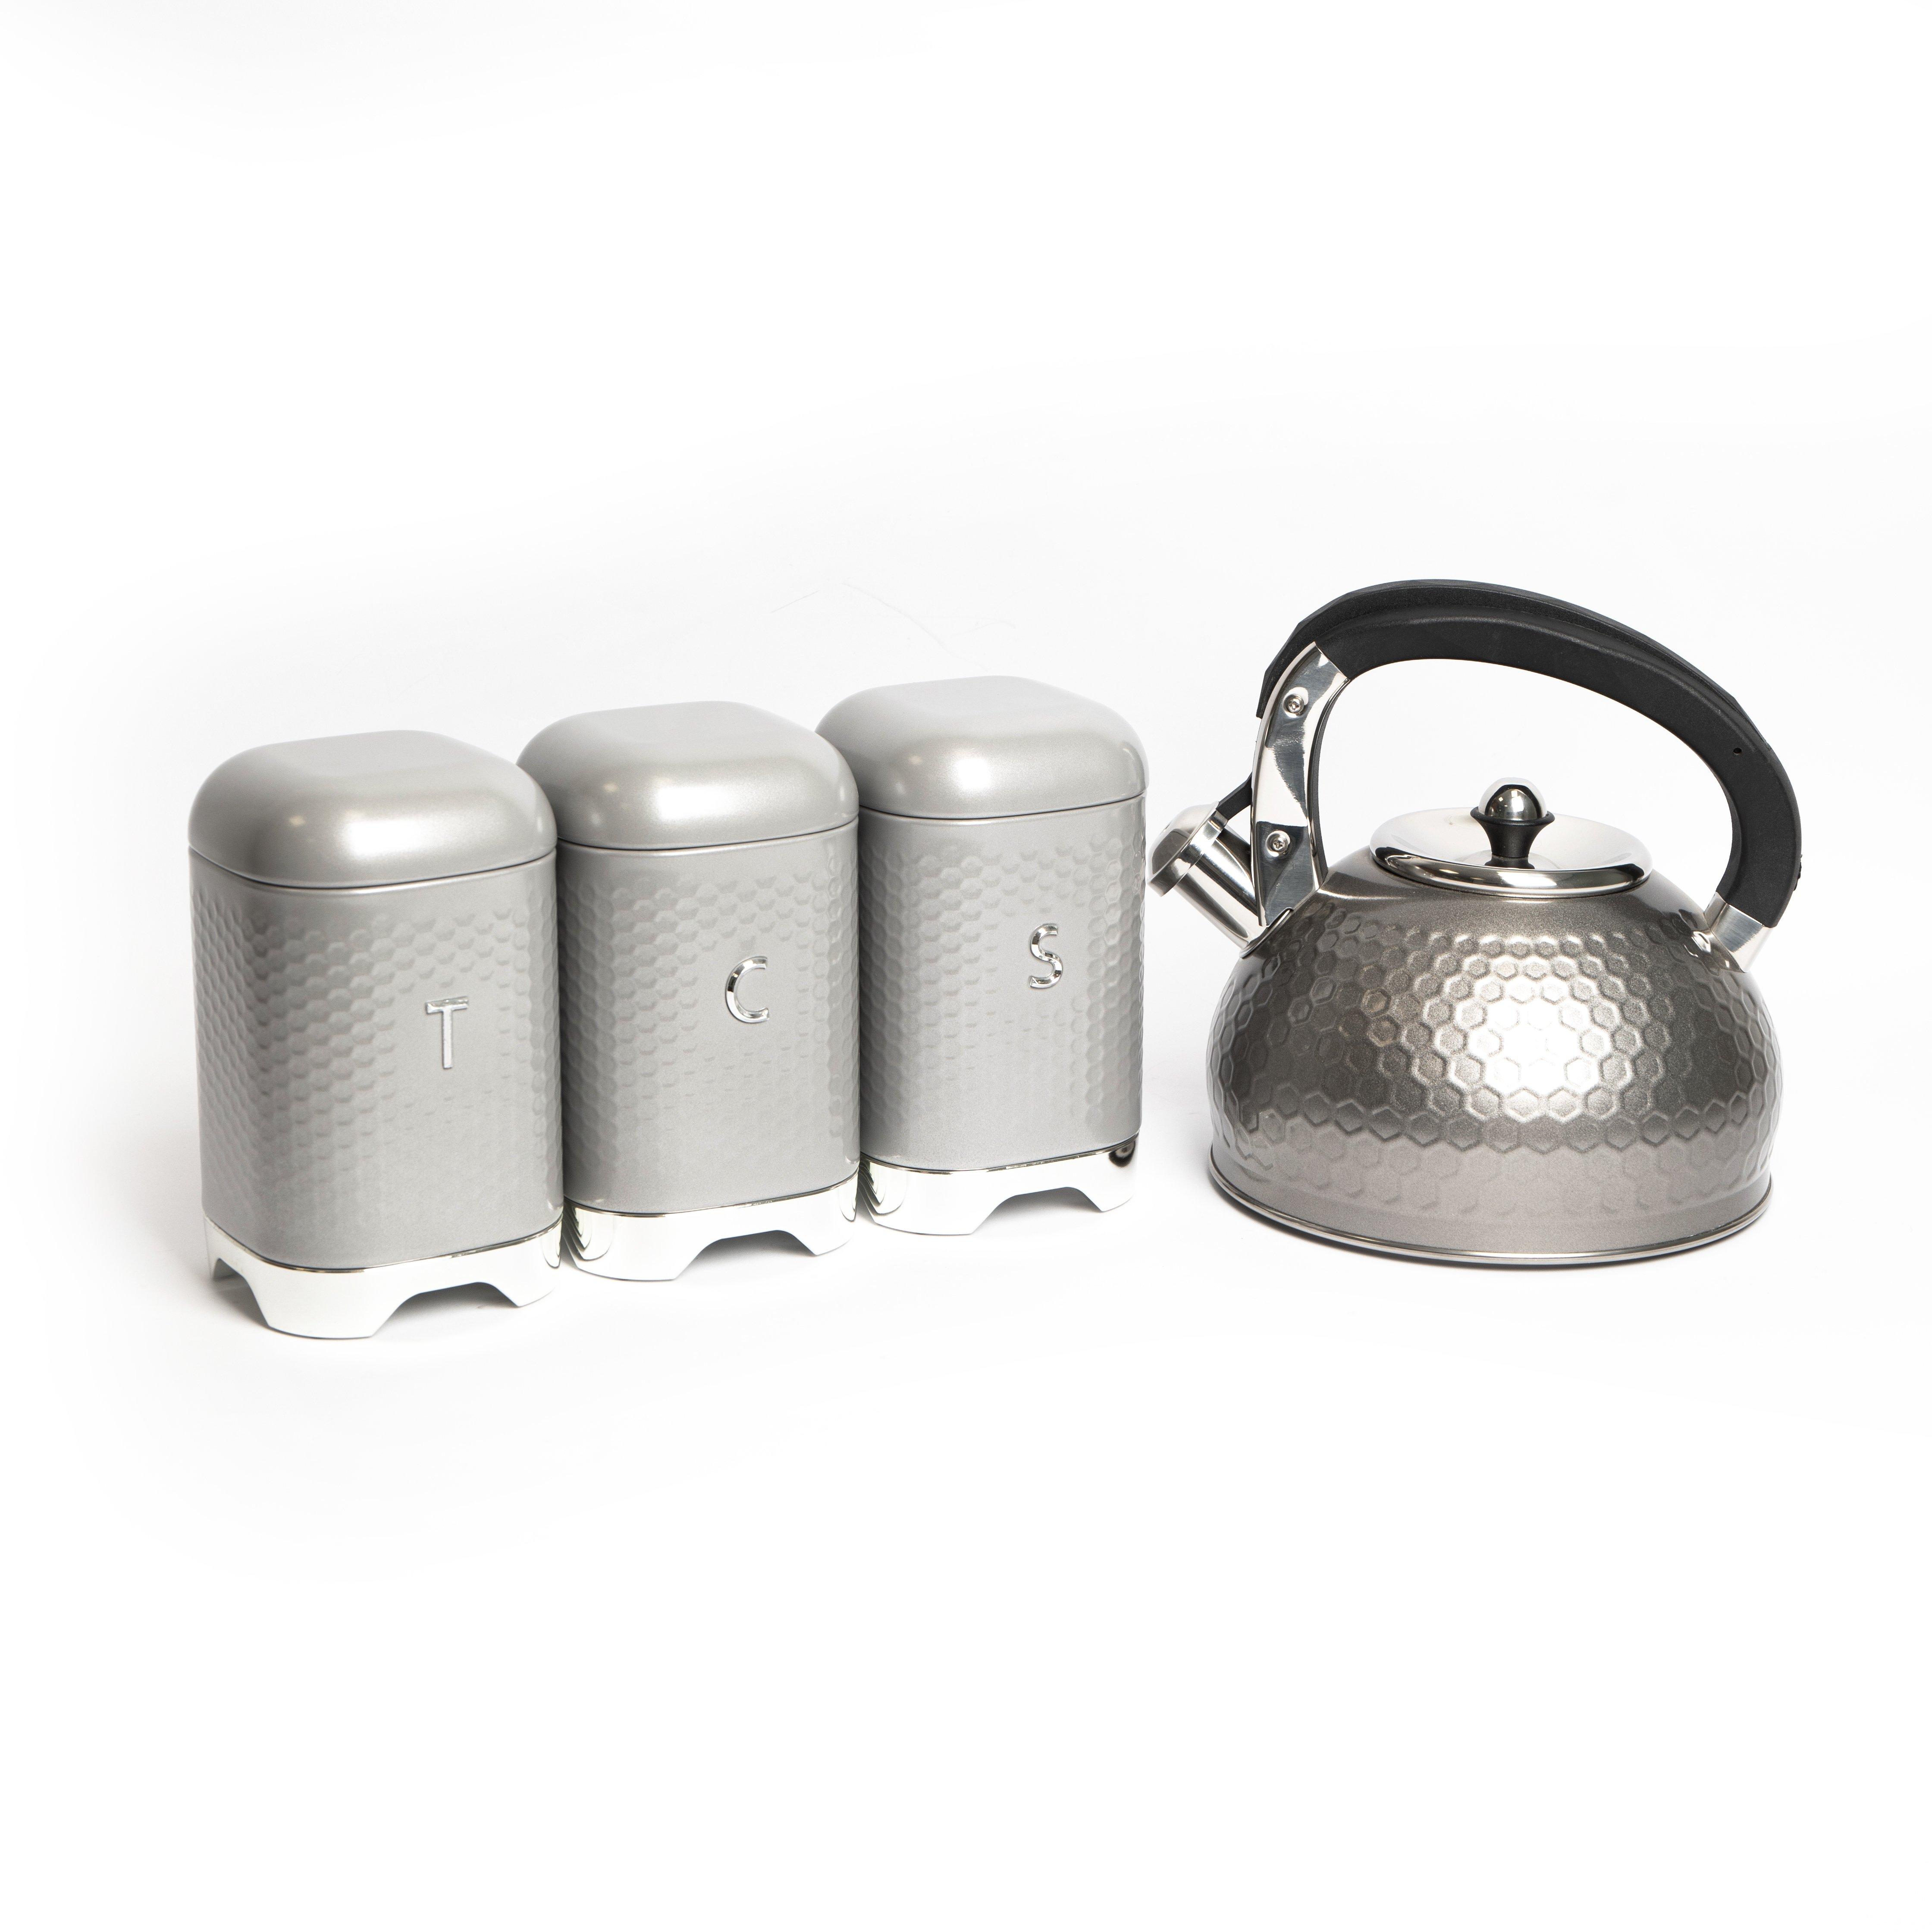 4pc Gift-Boxed Shadow Grey Kitchenware Set with Tea, Coffee & Sugar Canisters and 2.5L Whistling Ket